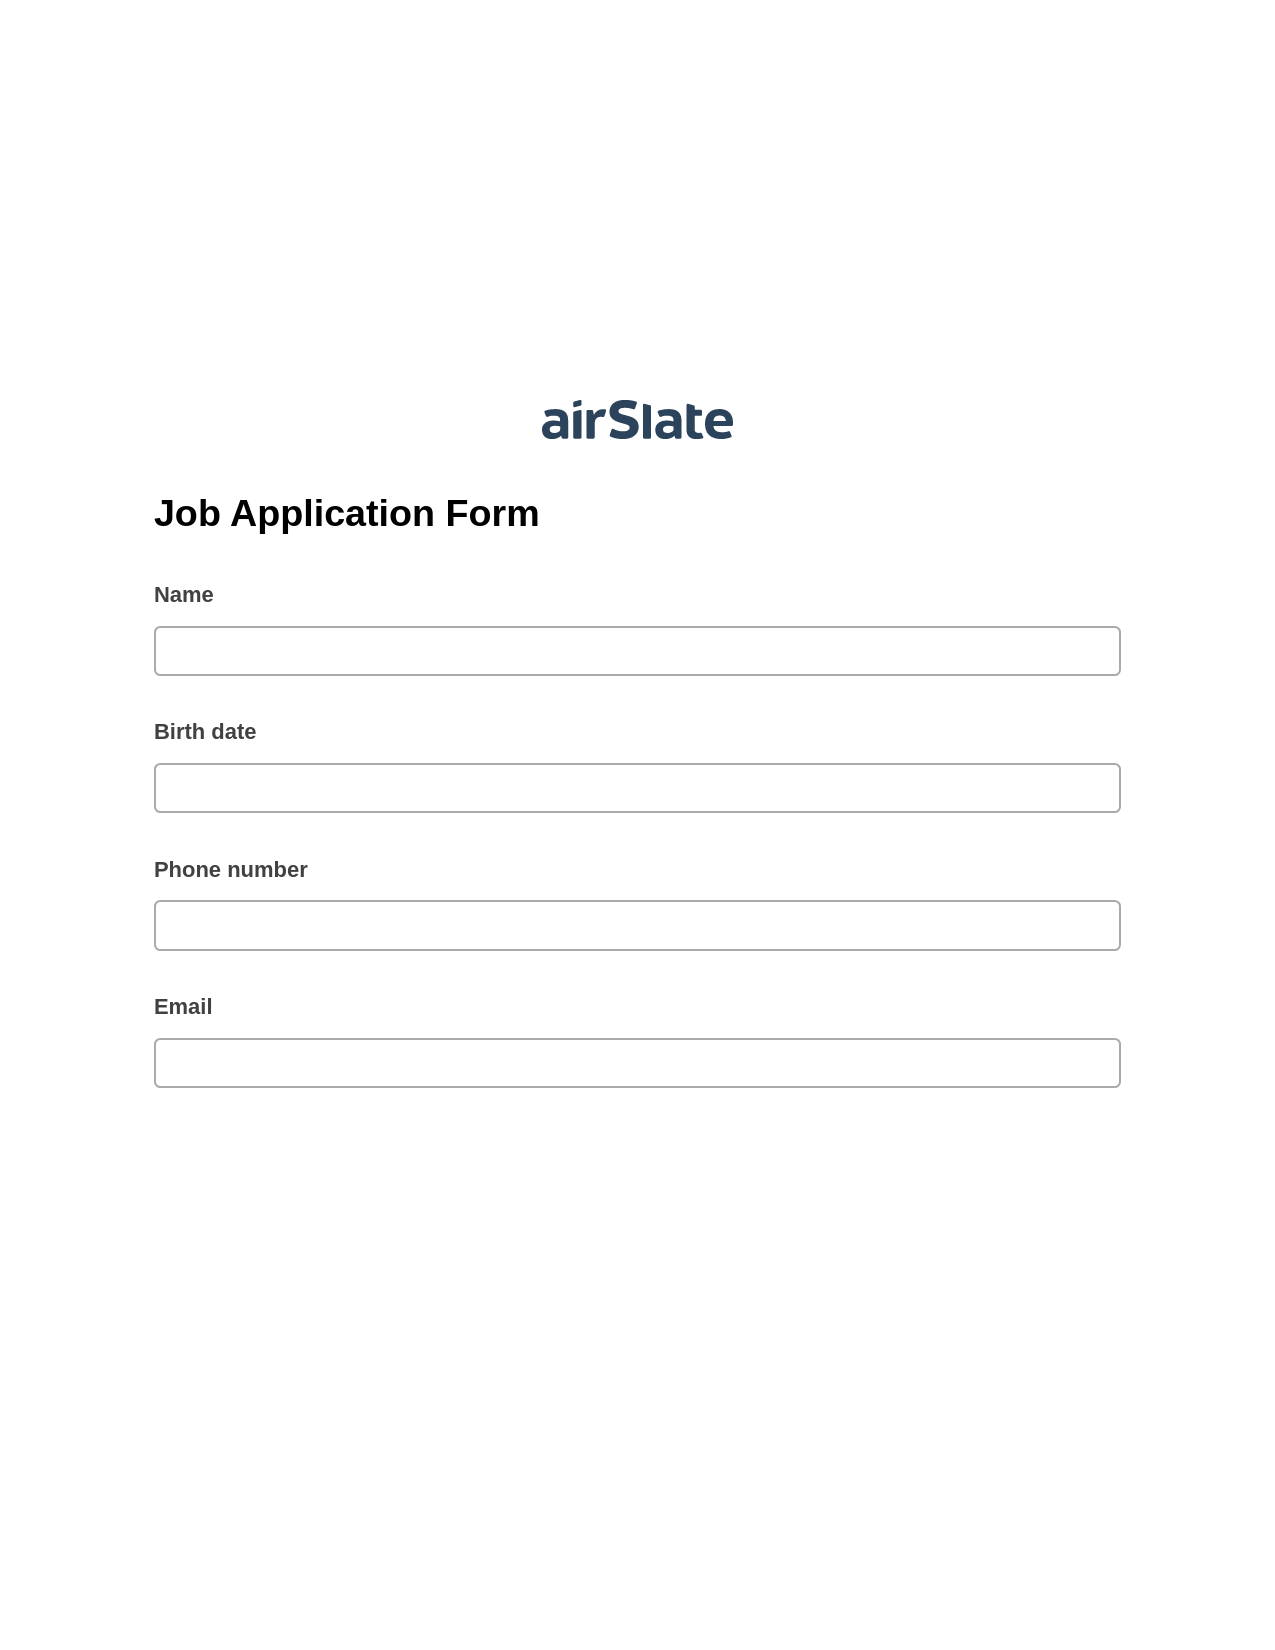 Job Application Form Pre-fill from MySQL Bot, Unassign Role Bot, Archive to SharePoint Folder Bot